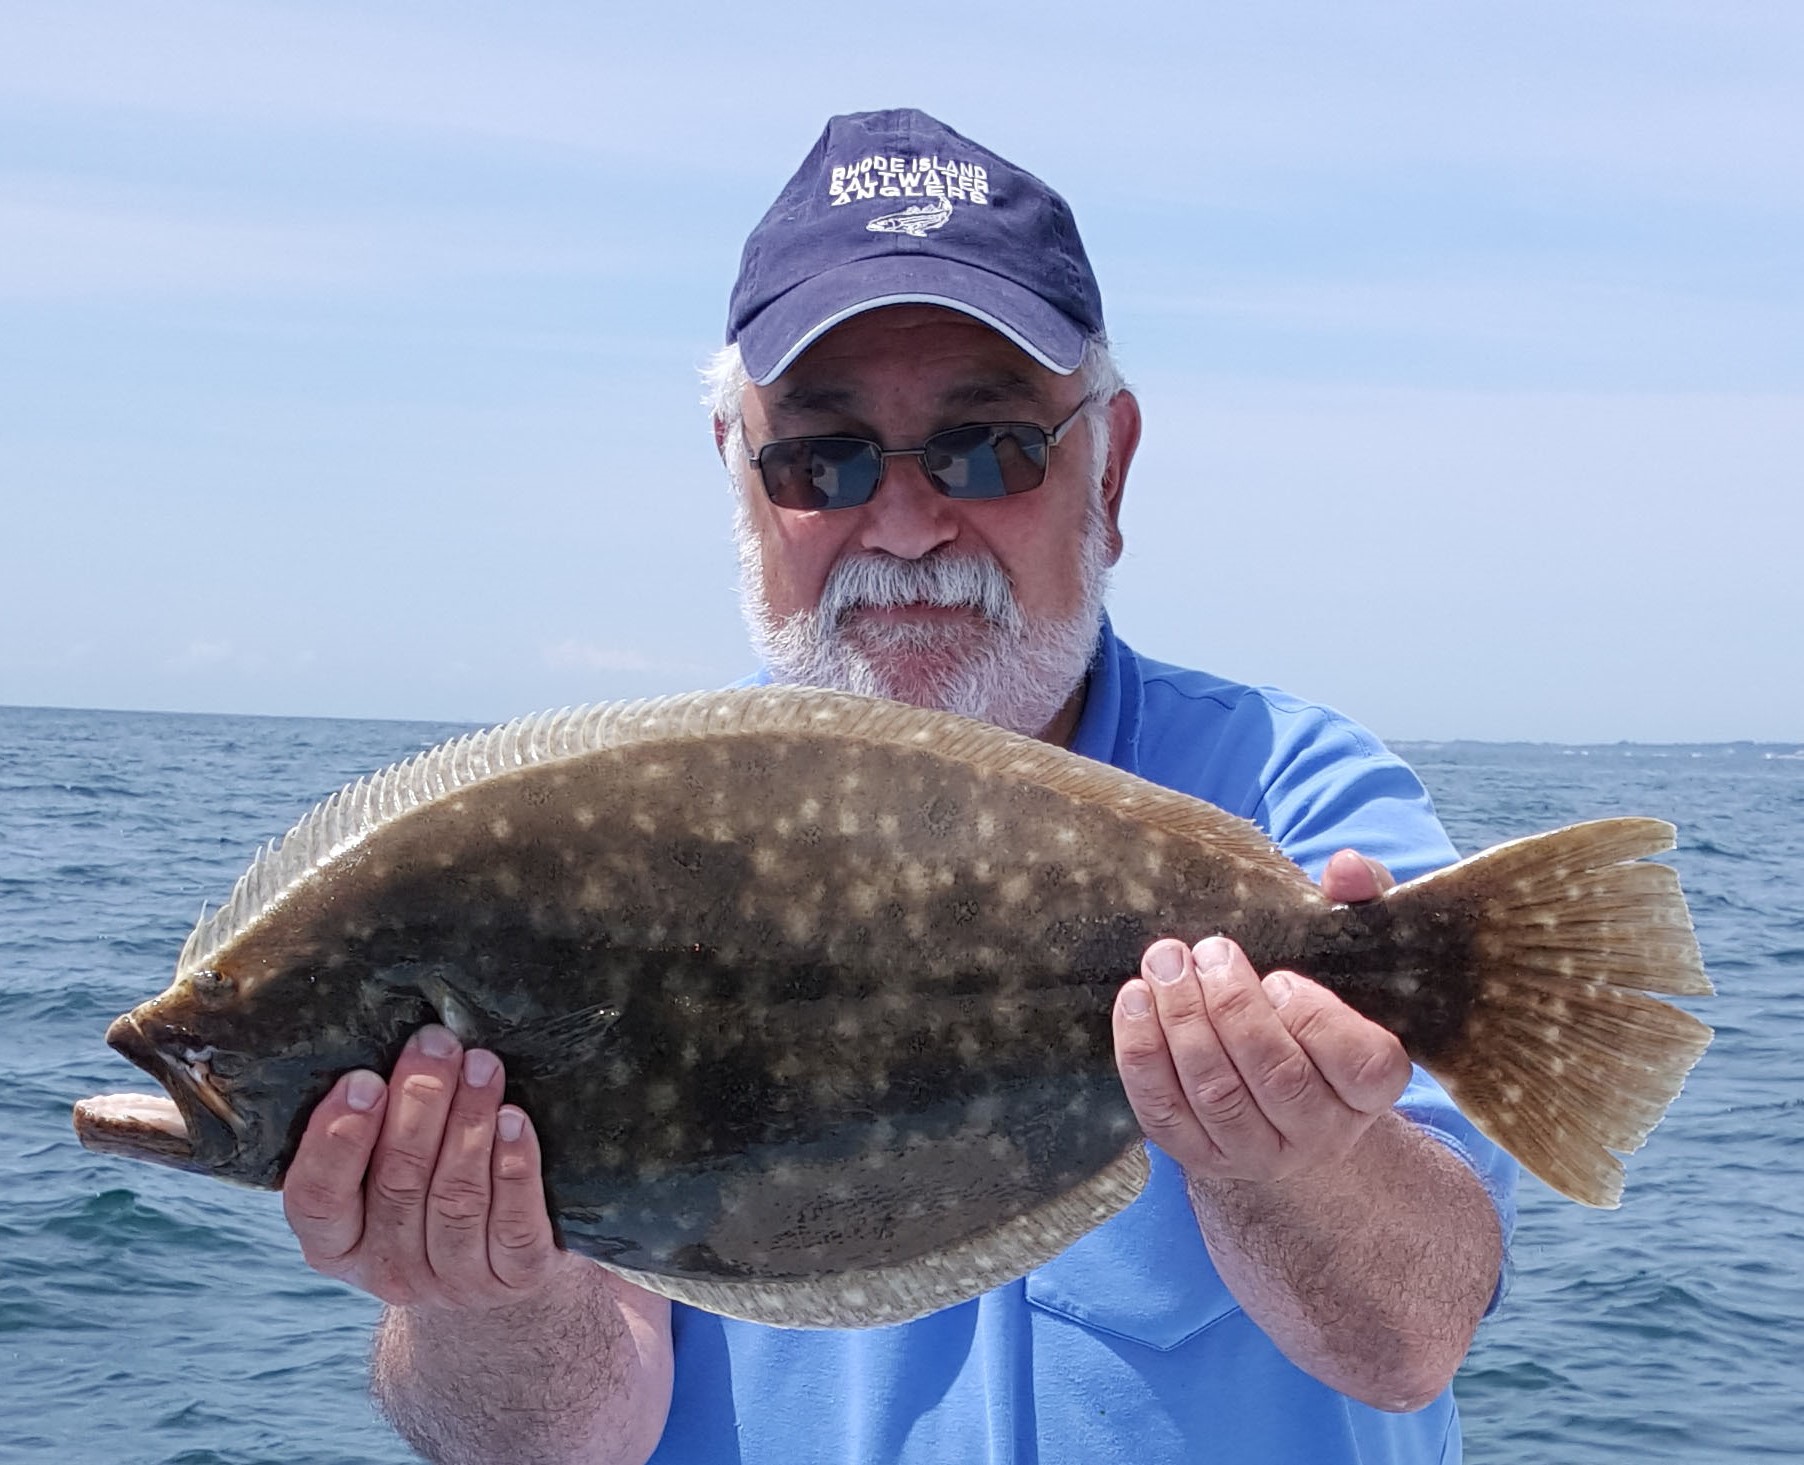 Steve Medeiros (with summer flounder), president of the RI Saltwater Anglers Association, represents 7,500 affiliated recreational anglers and 30 fishing clubs and associations.